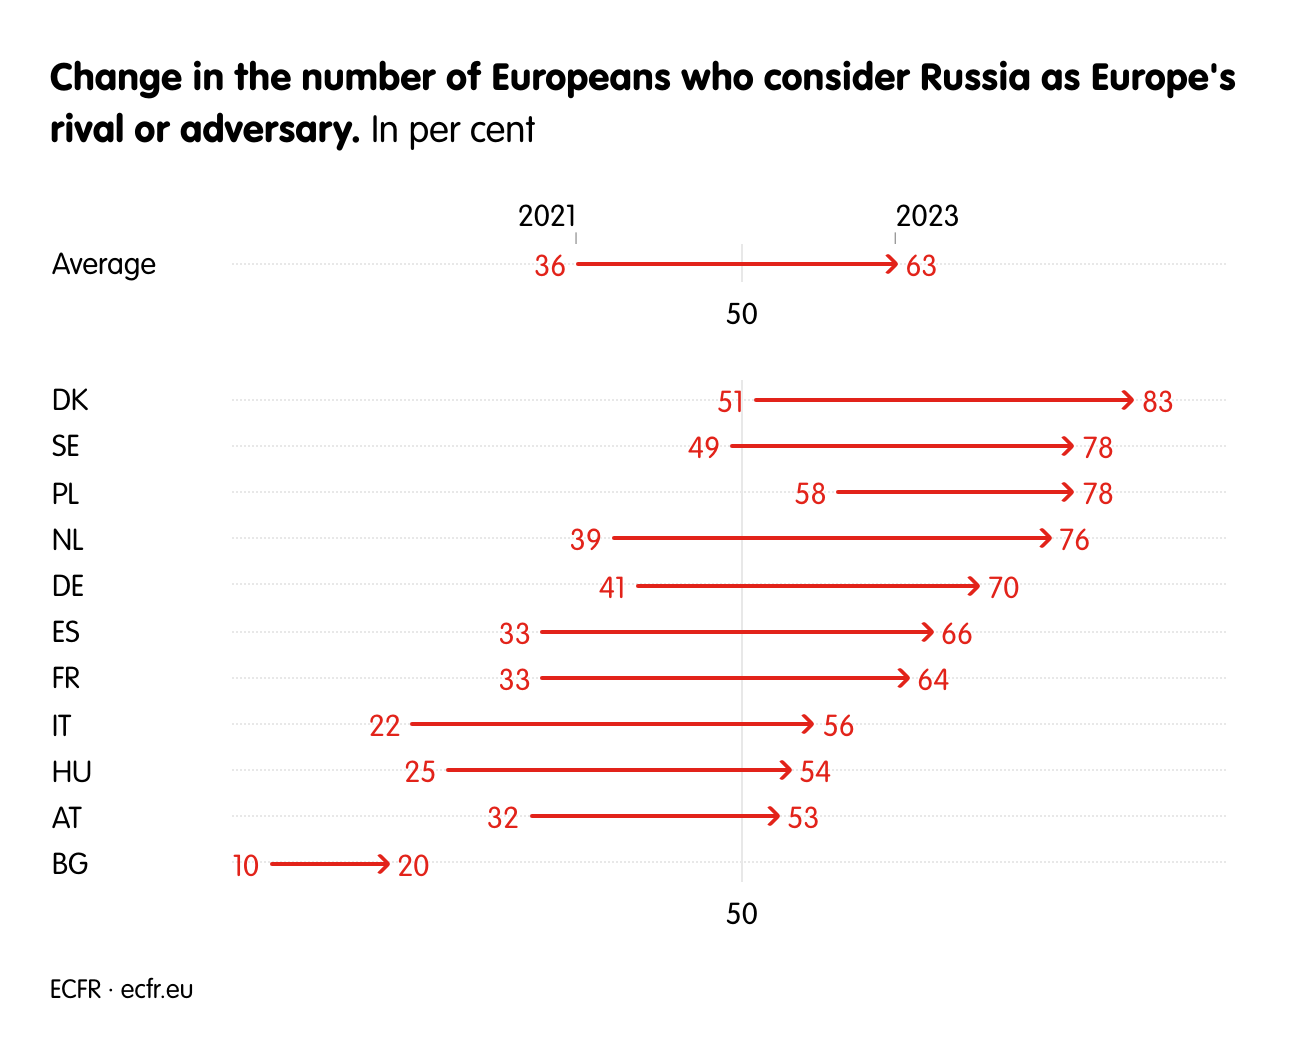 Change in the number of Europeans who consider Russia as Europe's rival or adversary.